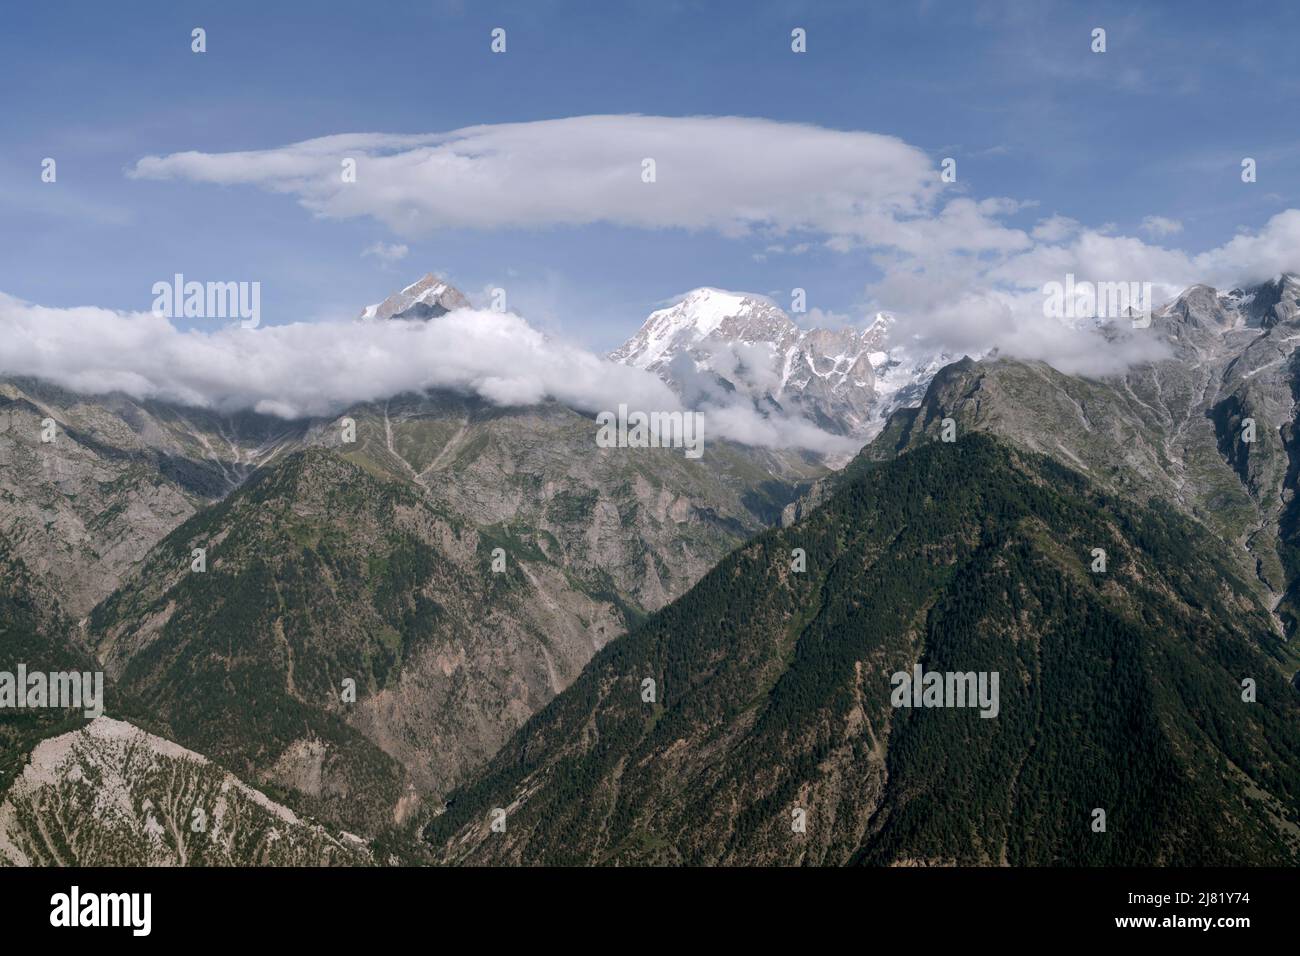 Himalaya mountains with snow peaks, rugged slopes some with woodland, all under bright blue sky with cloud formationss as viewed from Kalpa, India. Stock Photo